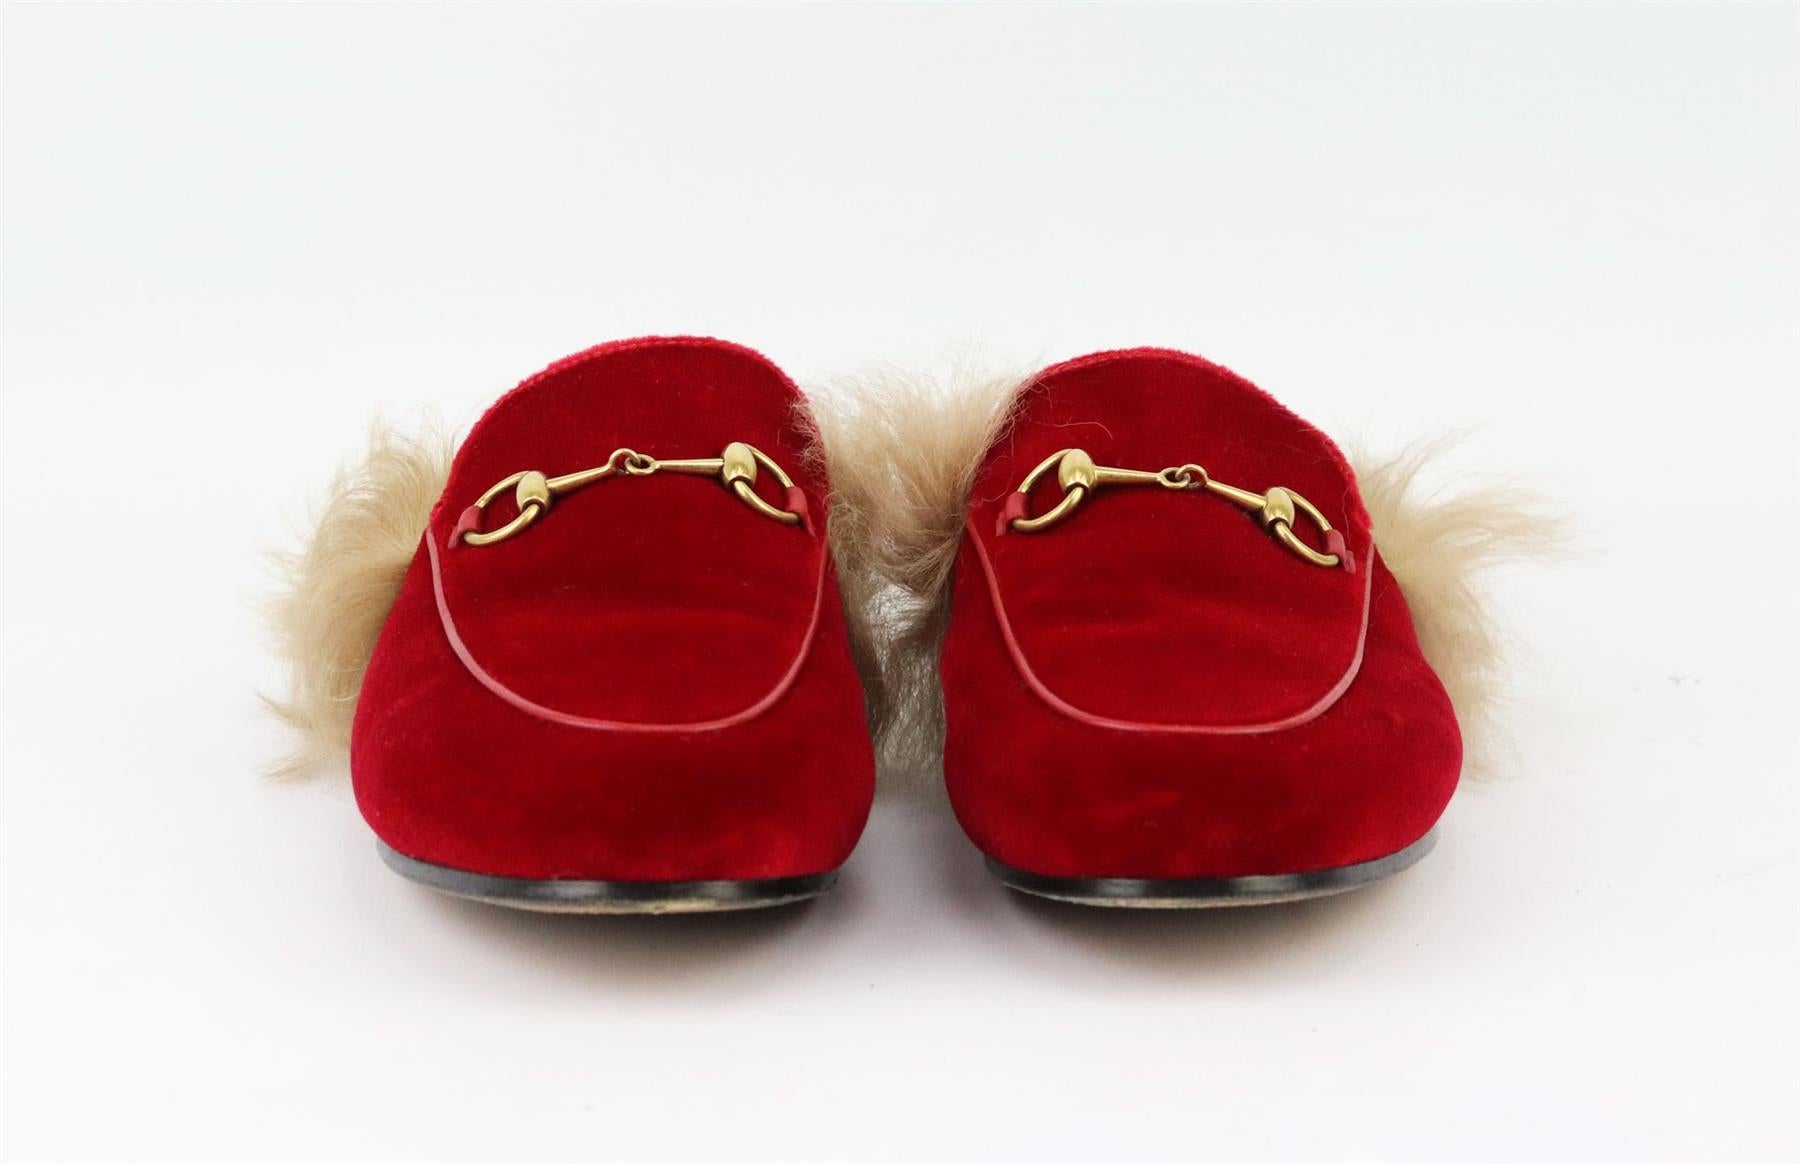 The ‘Princetown’ slippers by Gucci have been made in Italy from vibrant red velvet, lined in brown shearling and finished with the brand's signature horsebit hardware on top. Sole measures approximately 10 mm/ 0.5 inches. Red velvet, brown